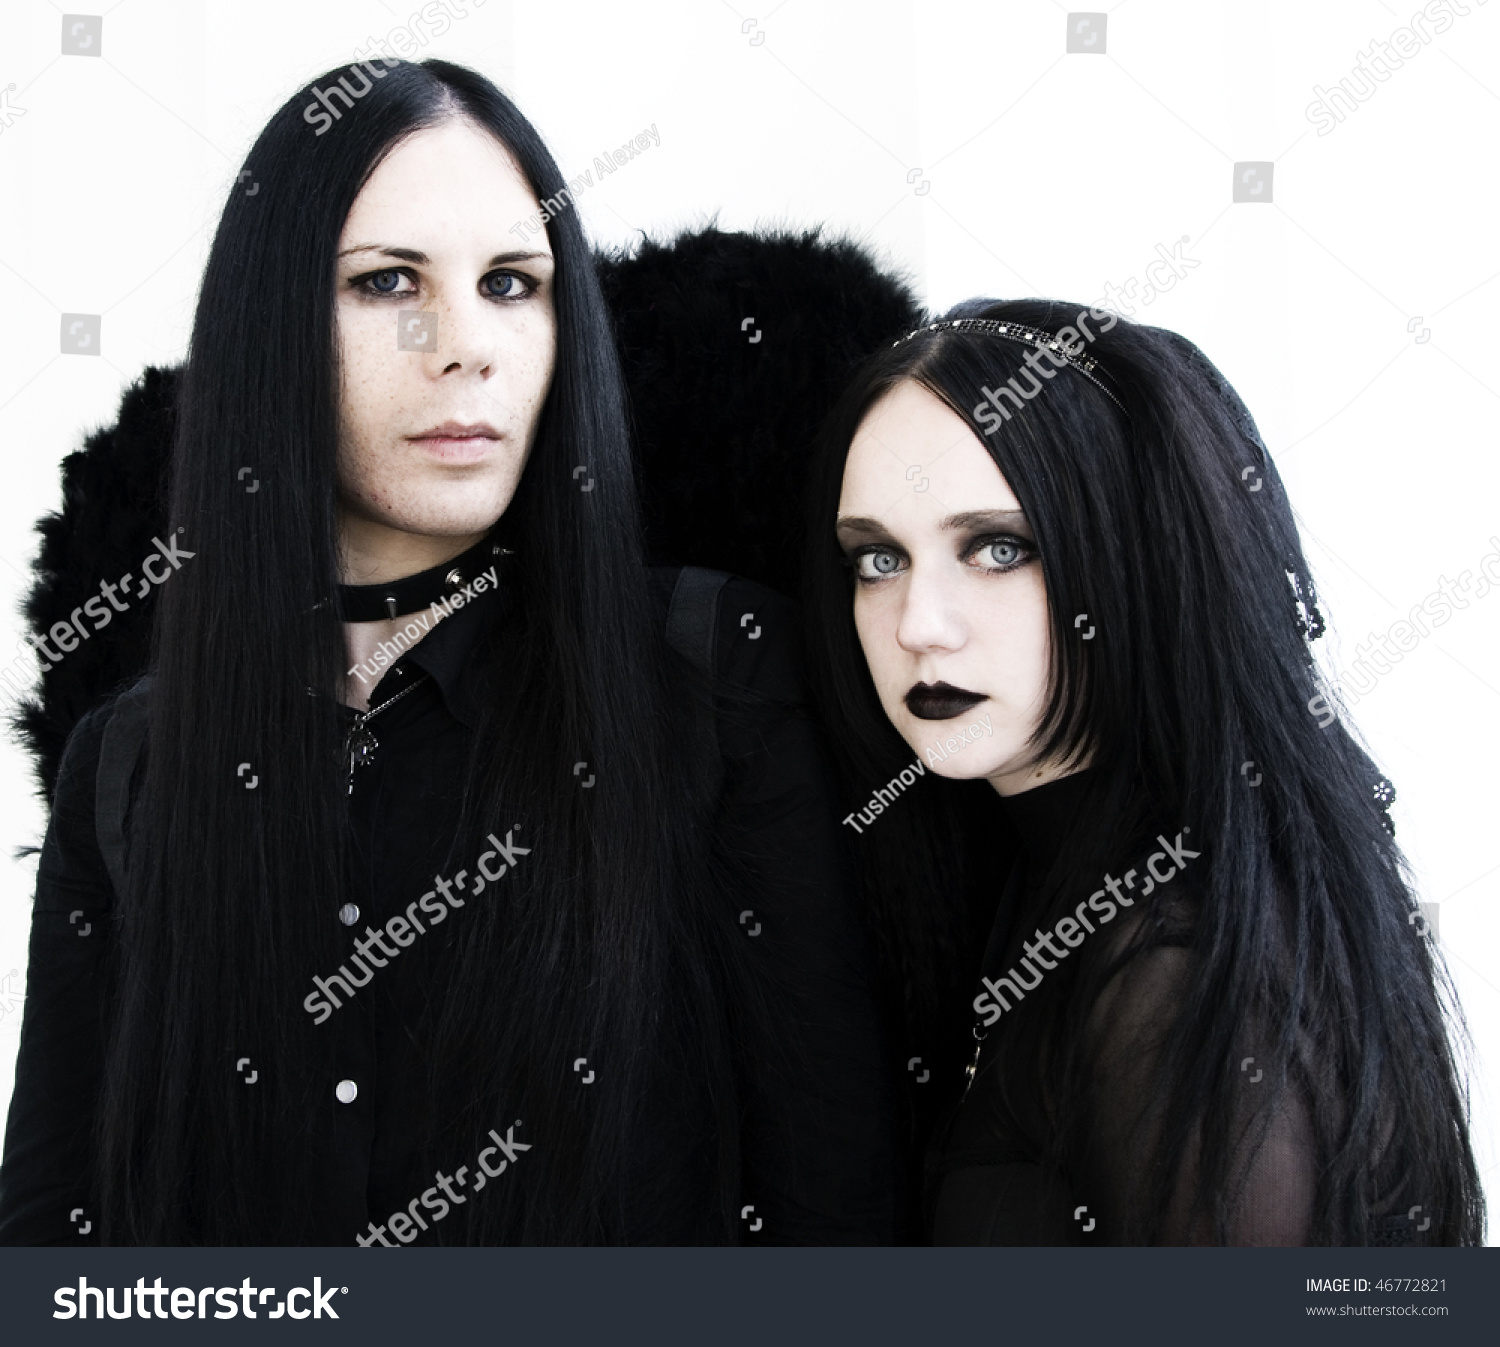 Gothic People 2 Stock Photo 46772821 : Shutterstock